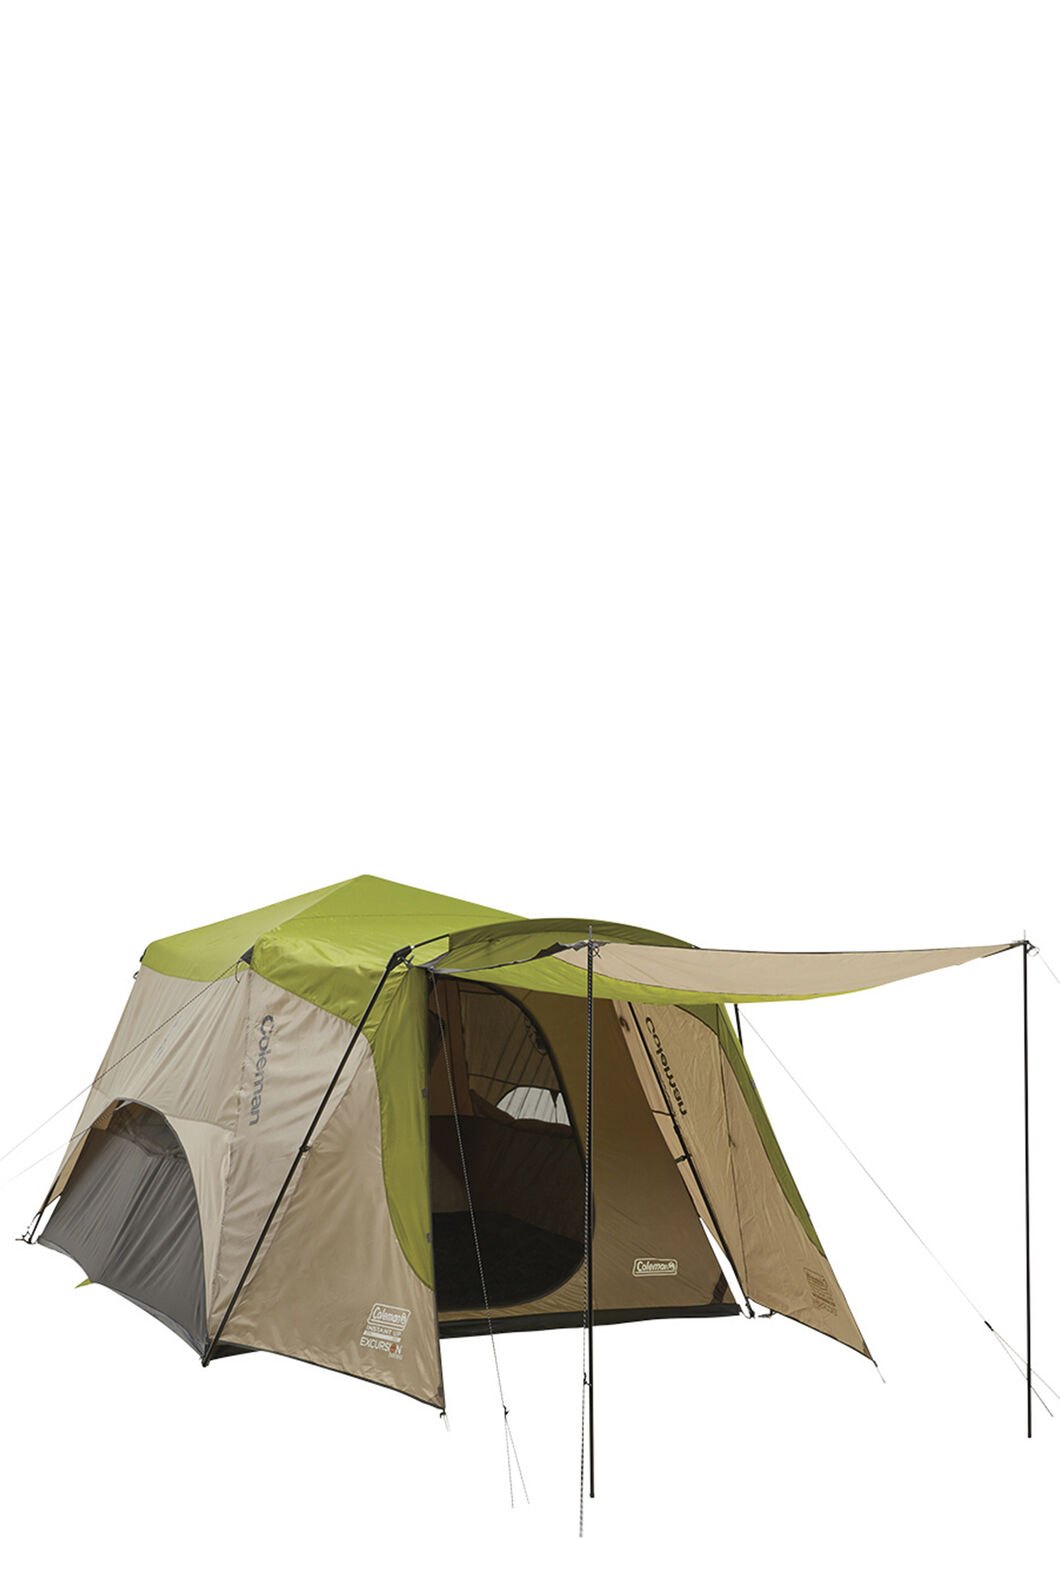 Coleman Excursion Instant Up 6 Person Touring Tent | Macpac
